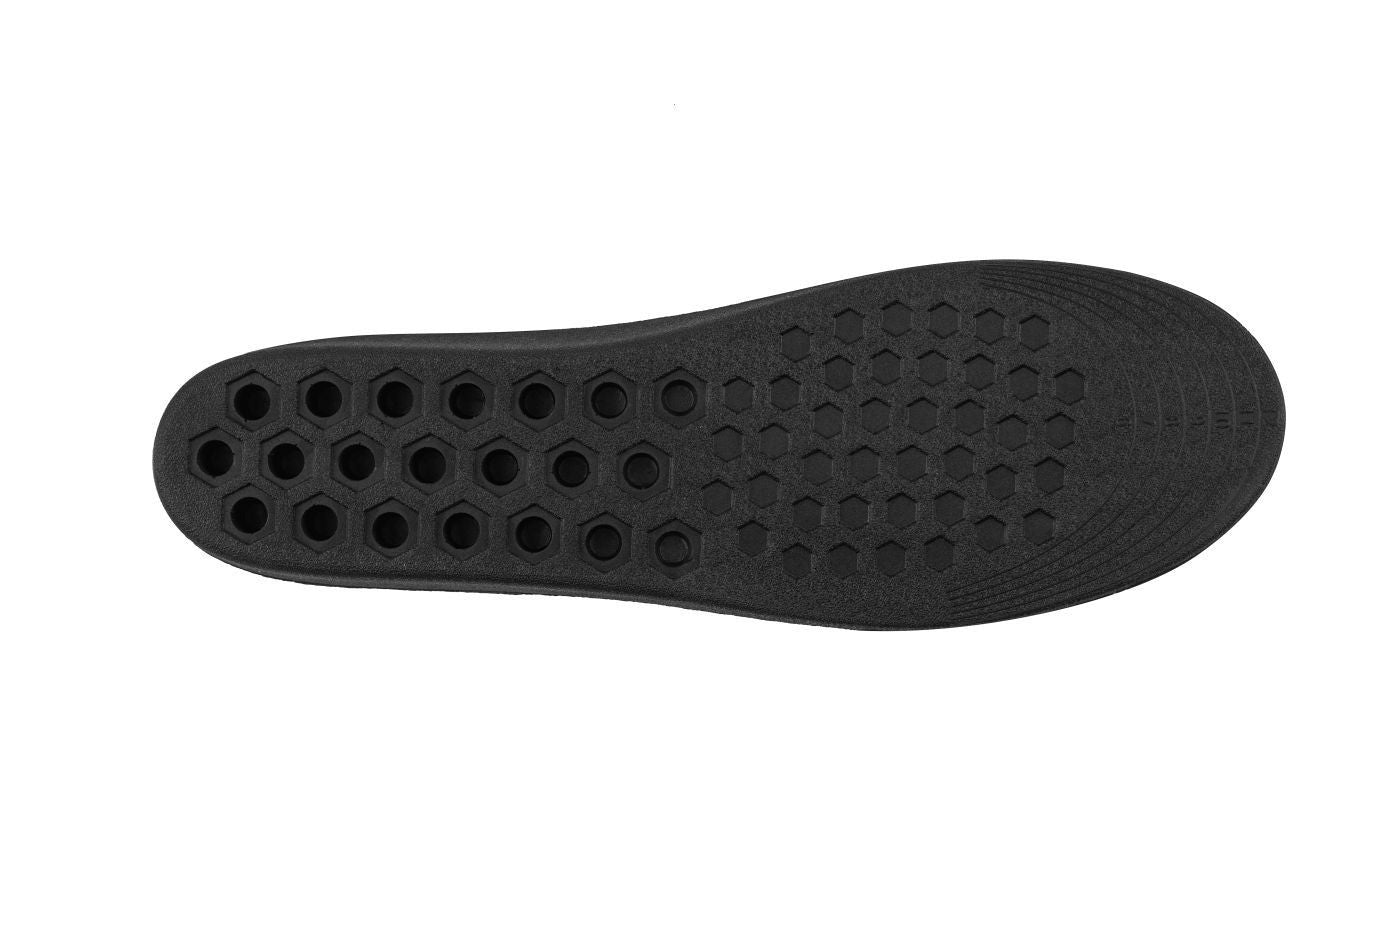 Elevator shoes height increase Breathable Comfort with One-Inch Lifting Shoe Inserts - IK206